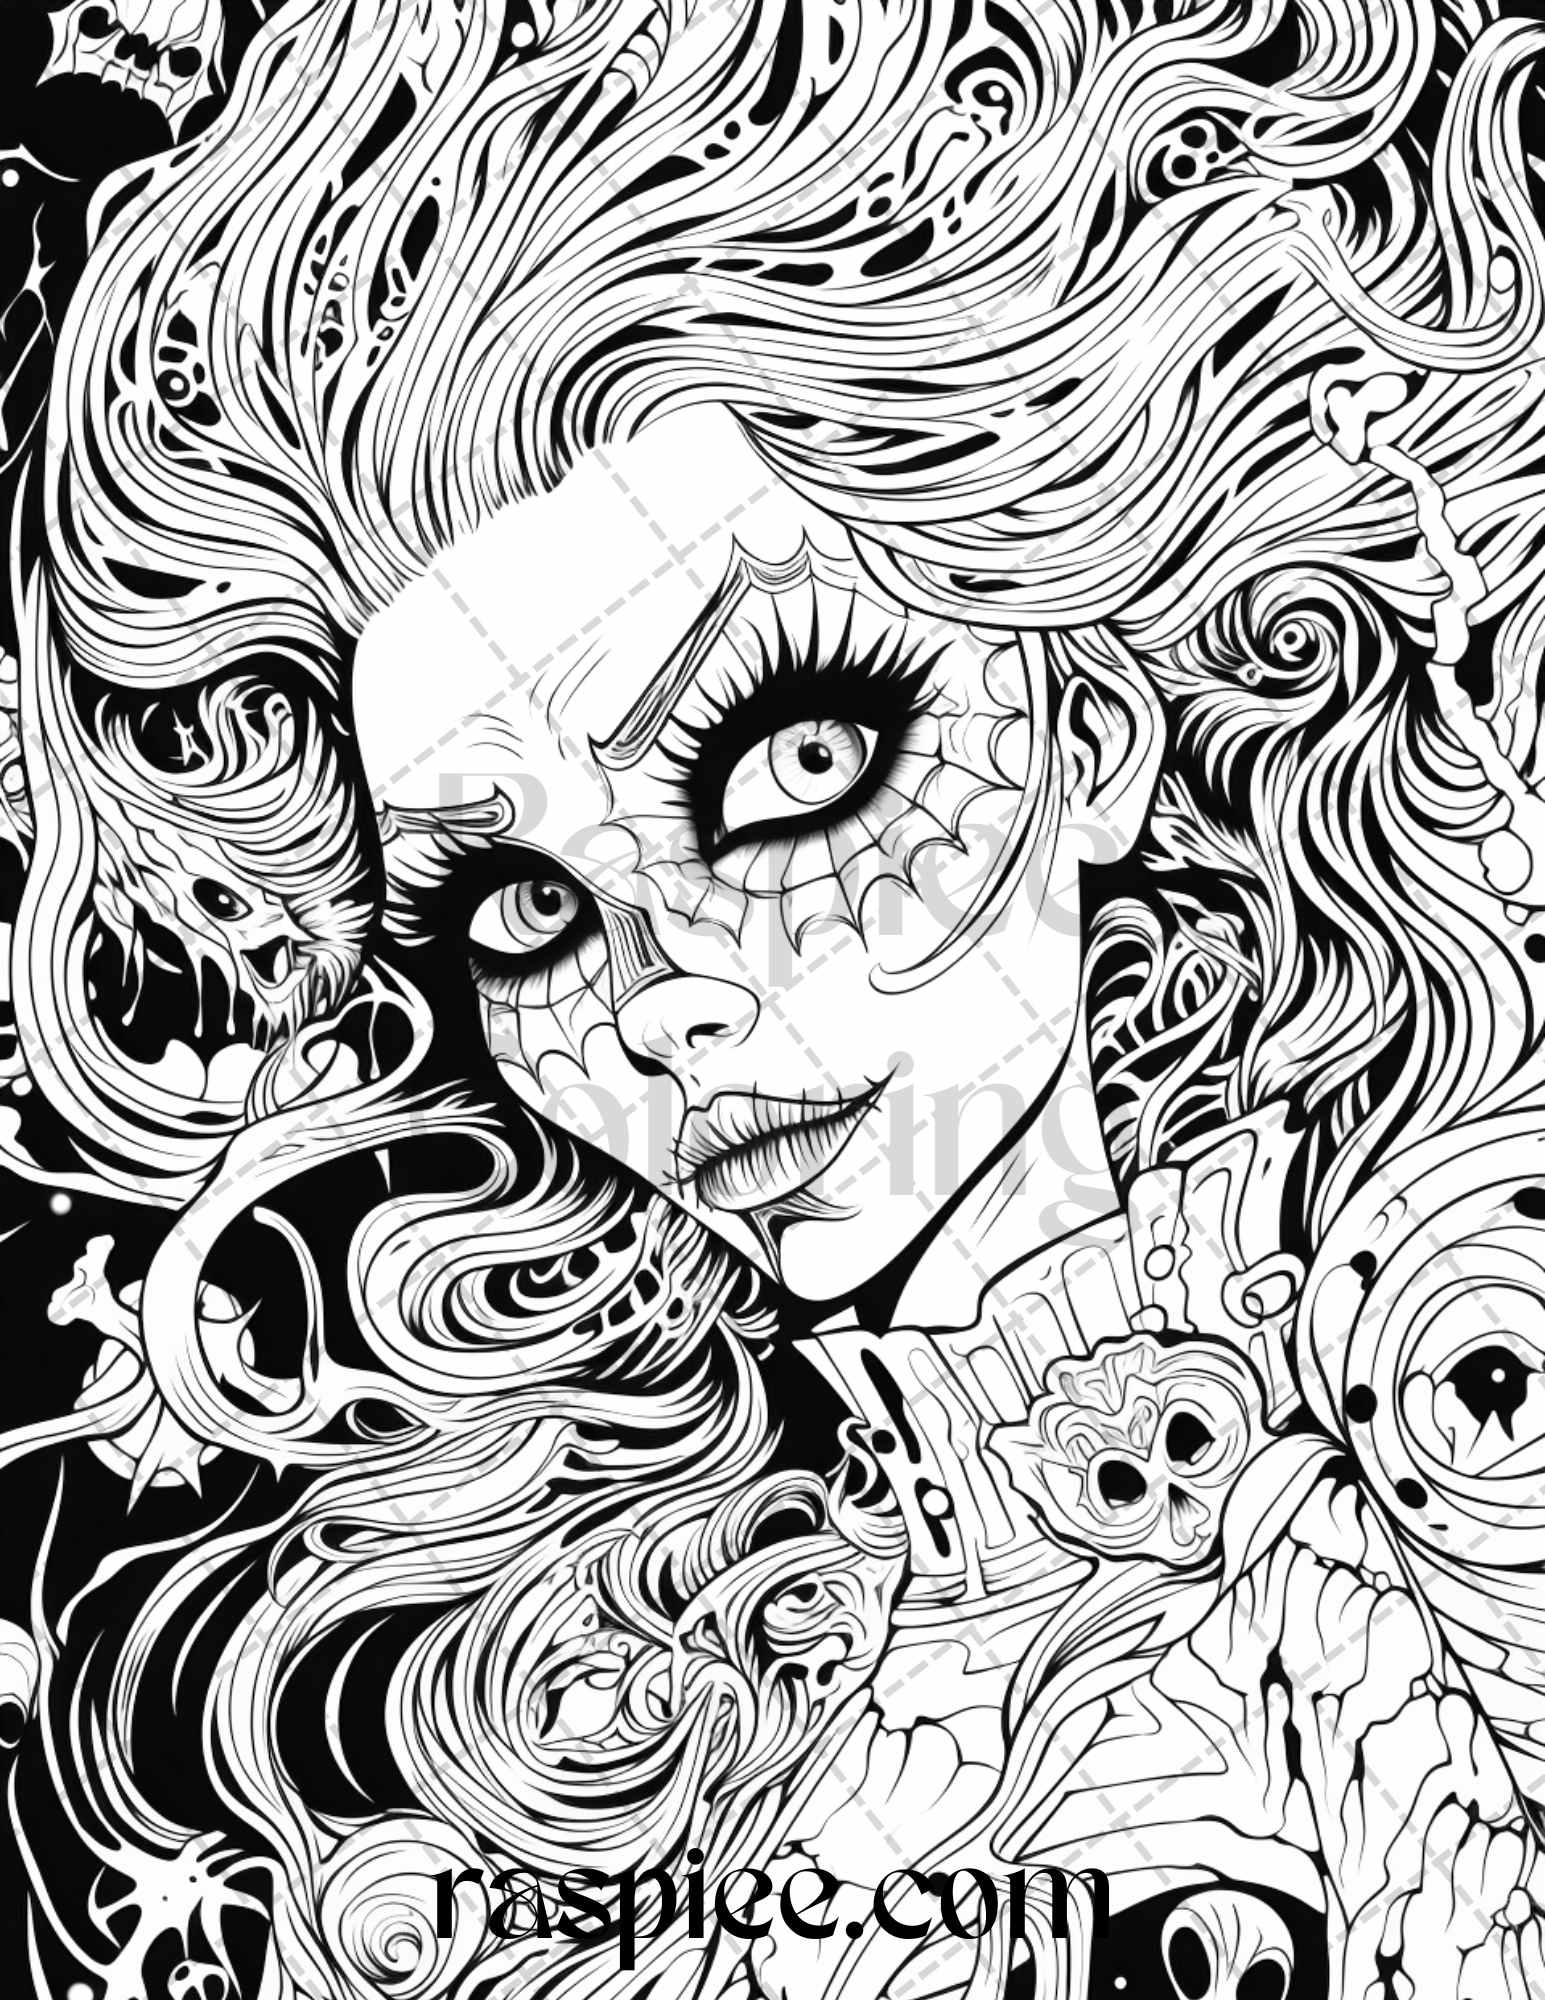 Grayscale Vampire Girls Coloring Book Set 1 30 Printable Adult Coloring  Pages Download Grayscale Illustration Printable PDF File AI 